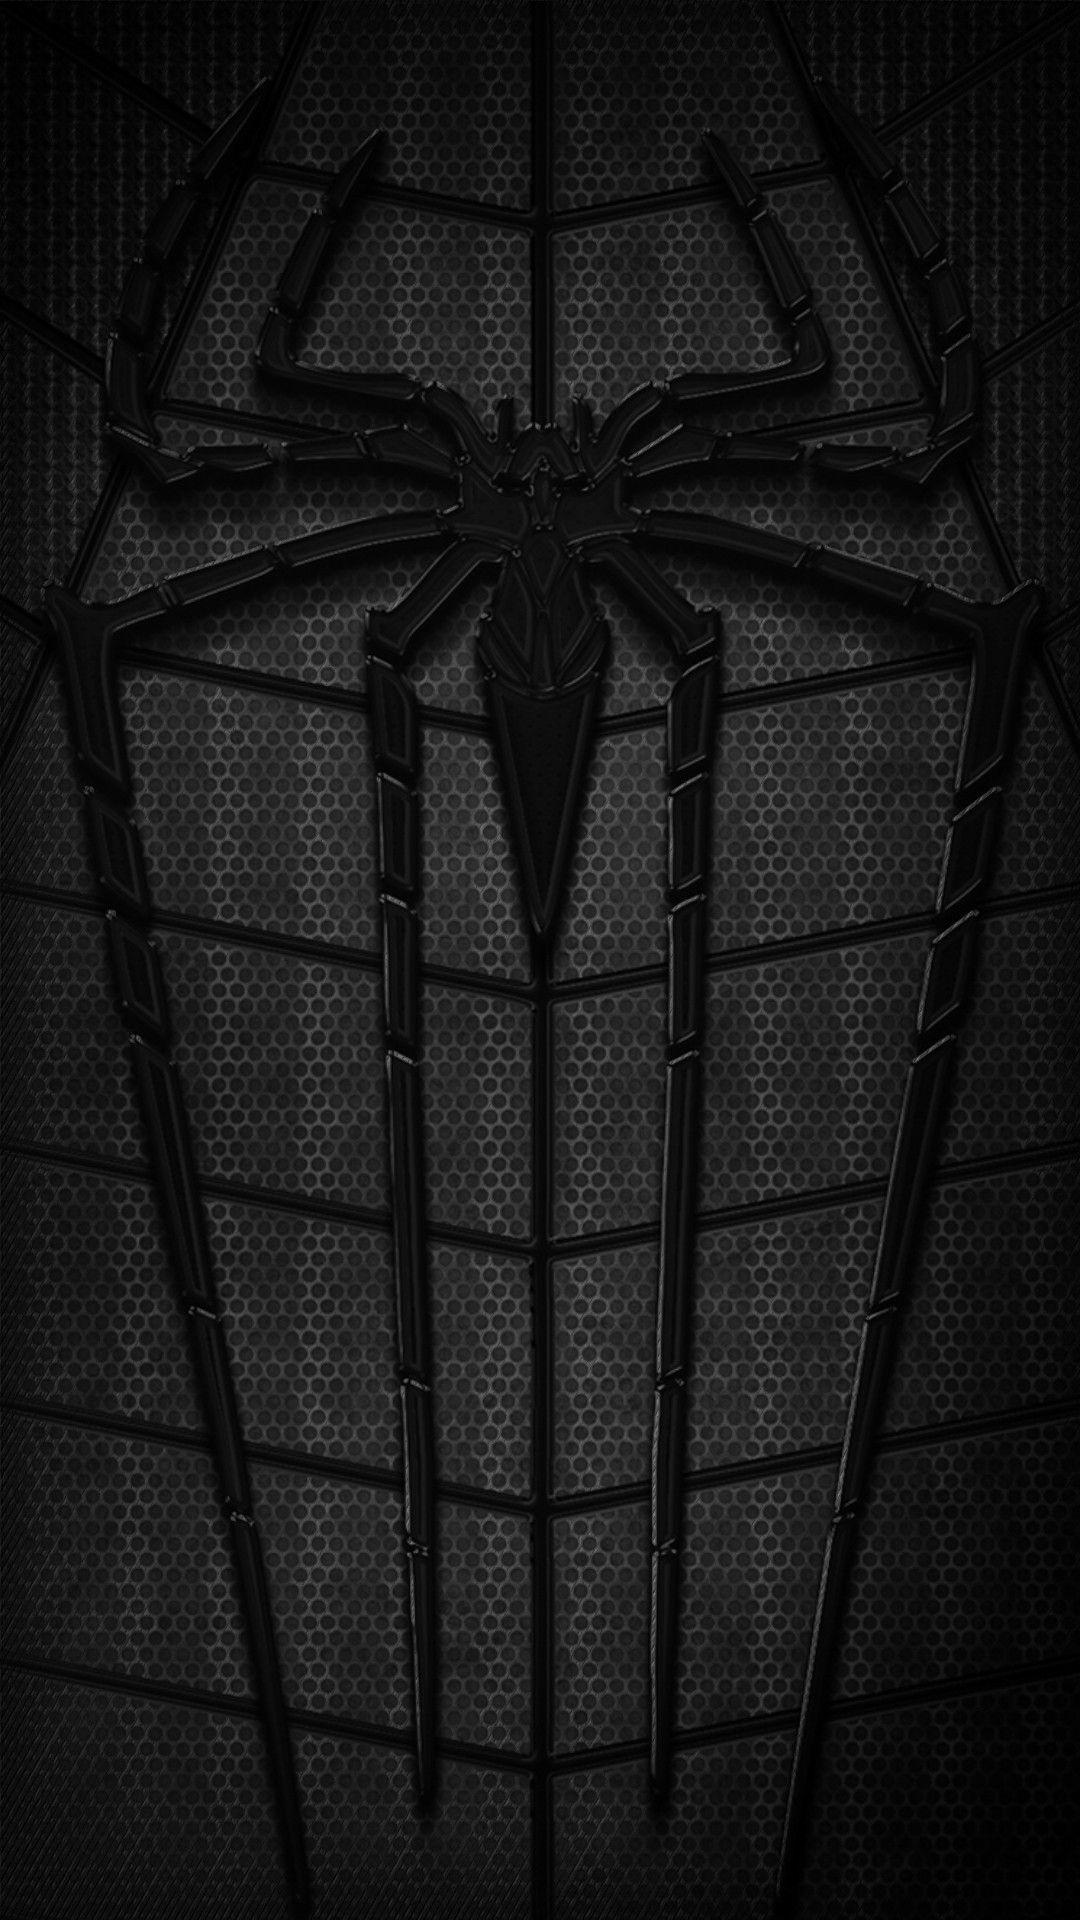 Hd Logo Spider Man Iphone Wallpapers Wallpaper Cave